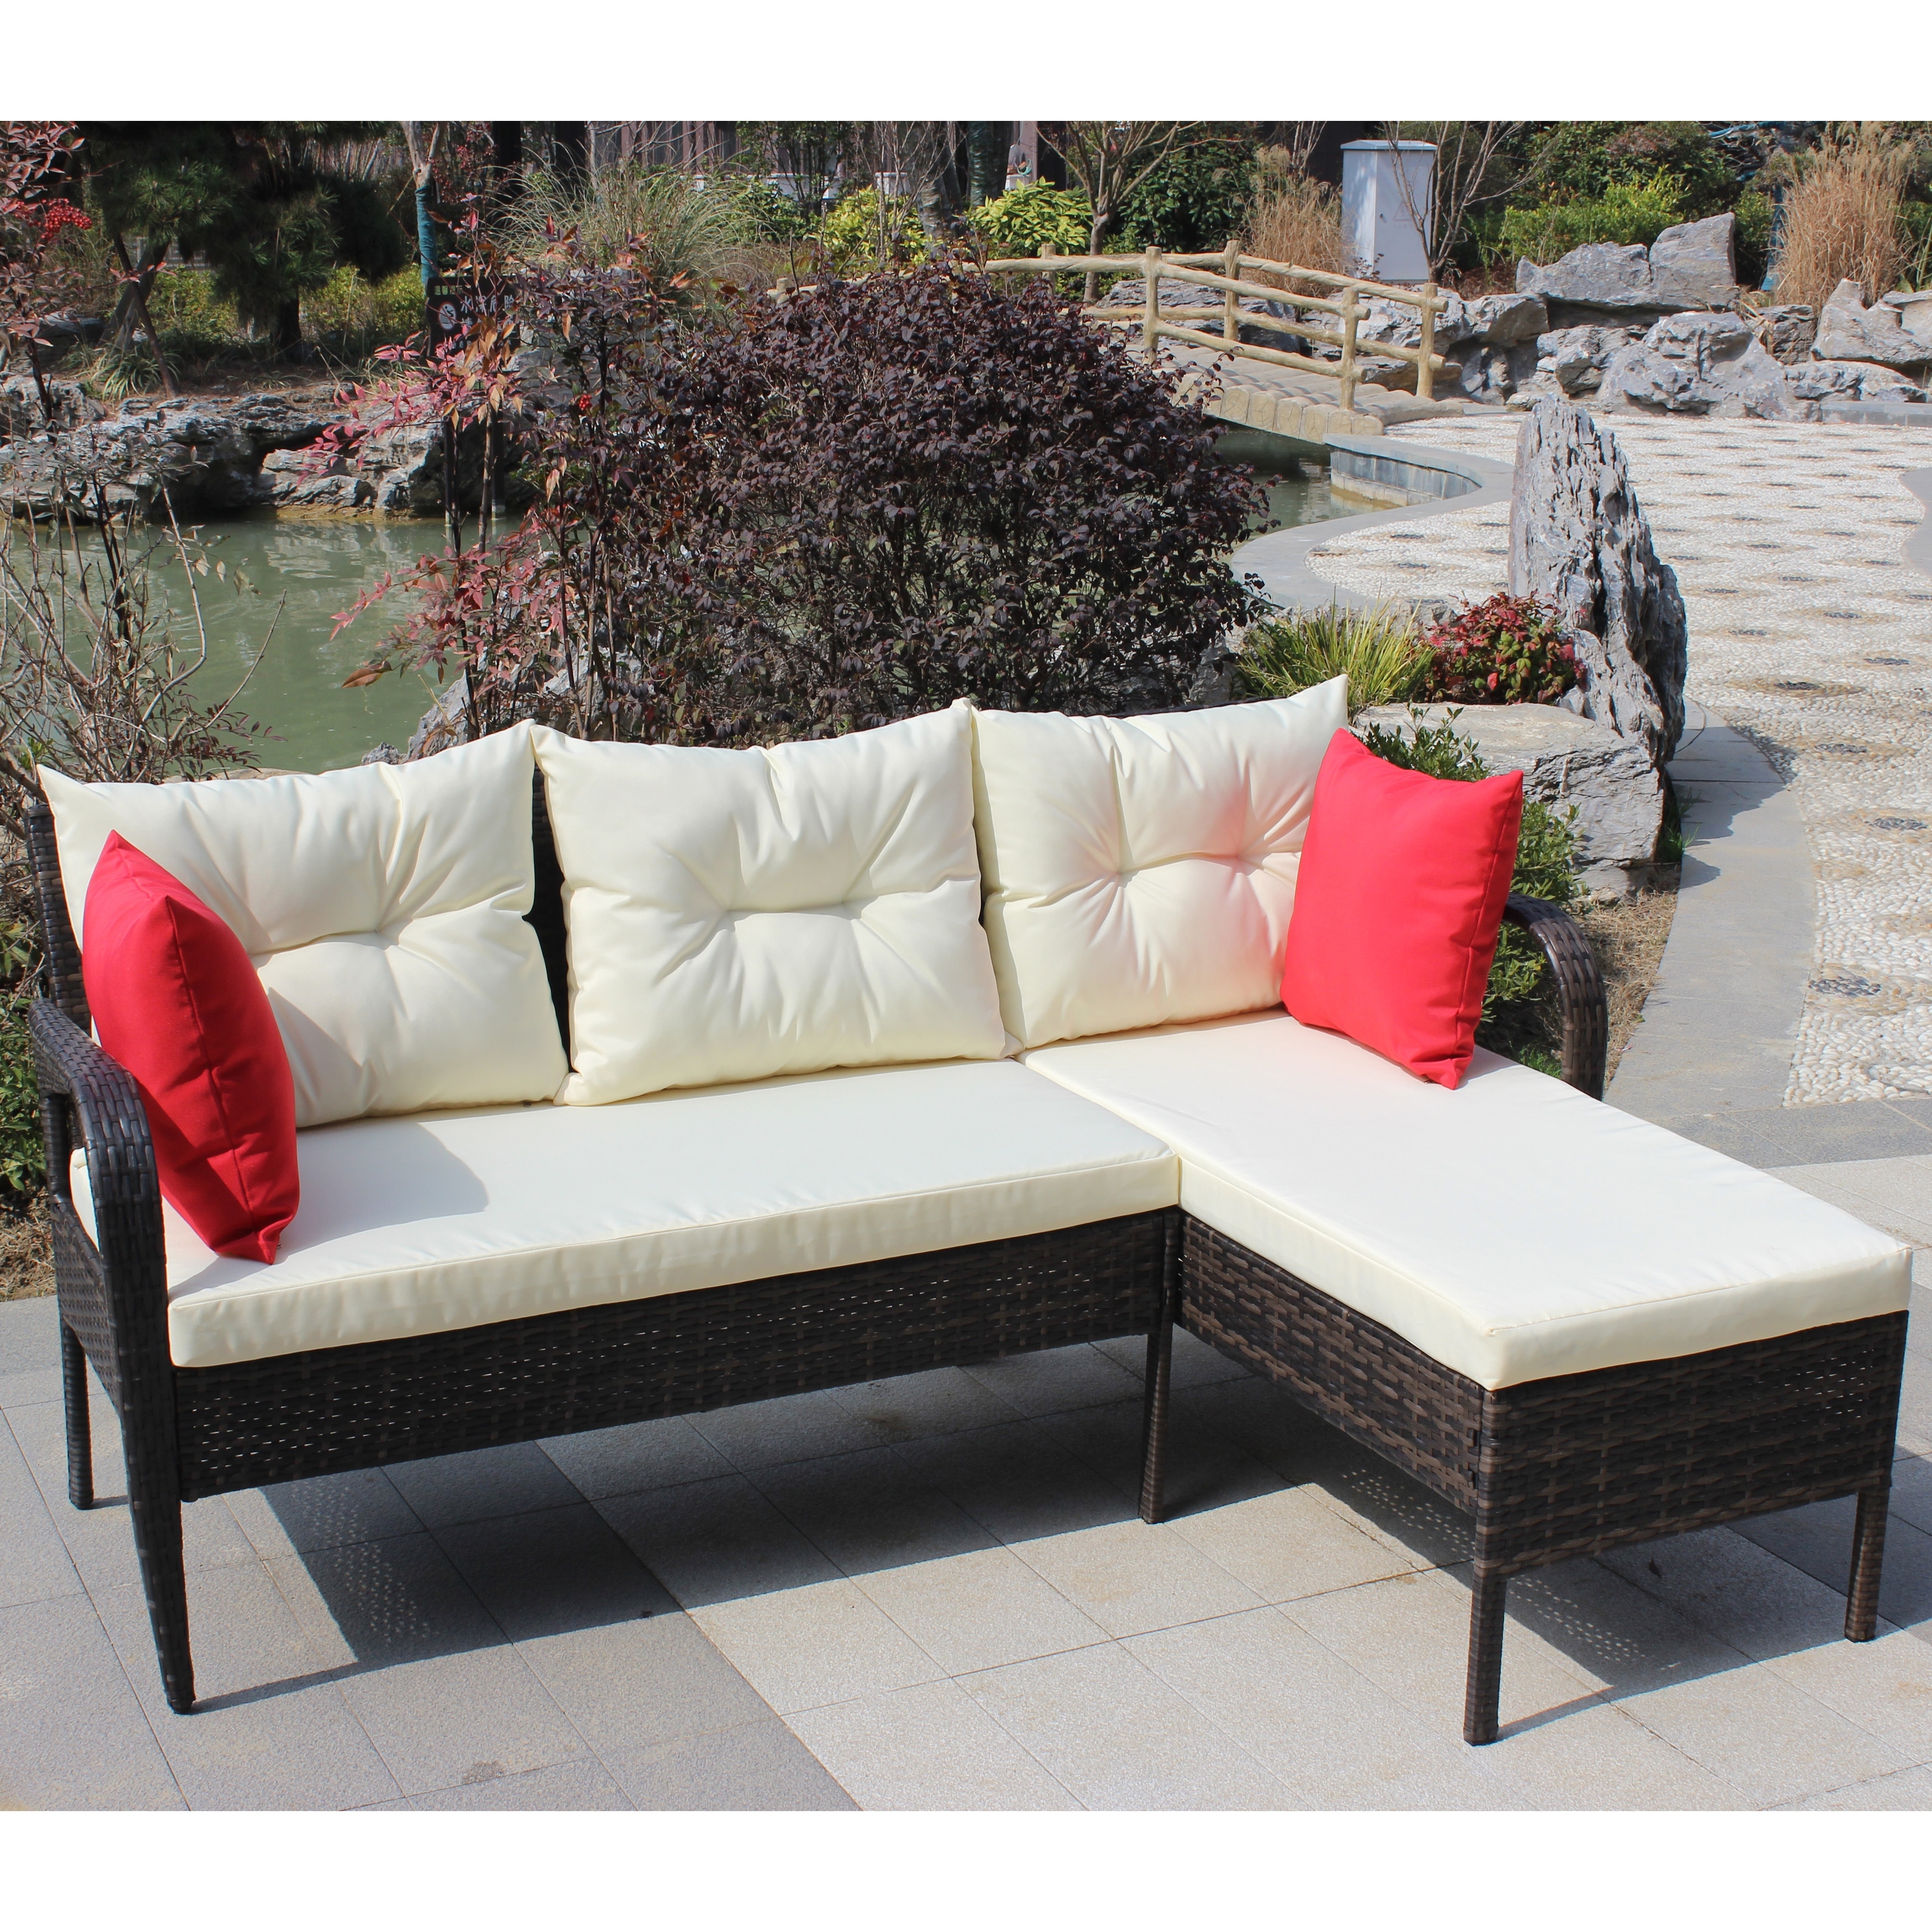 Outdoor Patio Furniture Sets  2 Piece Wicker Ratten Sectional With Cushions